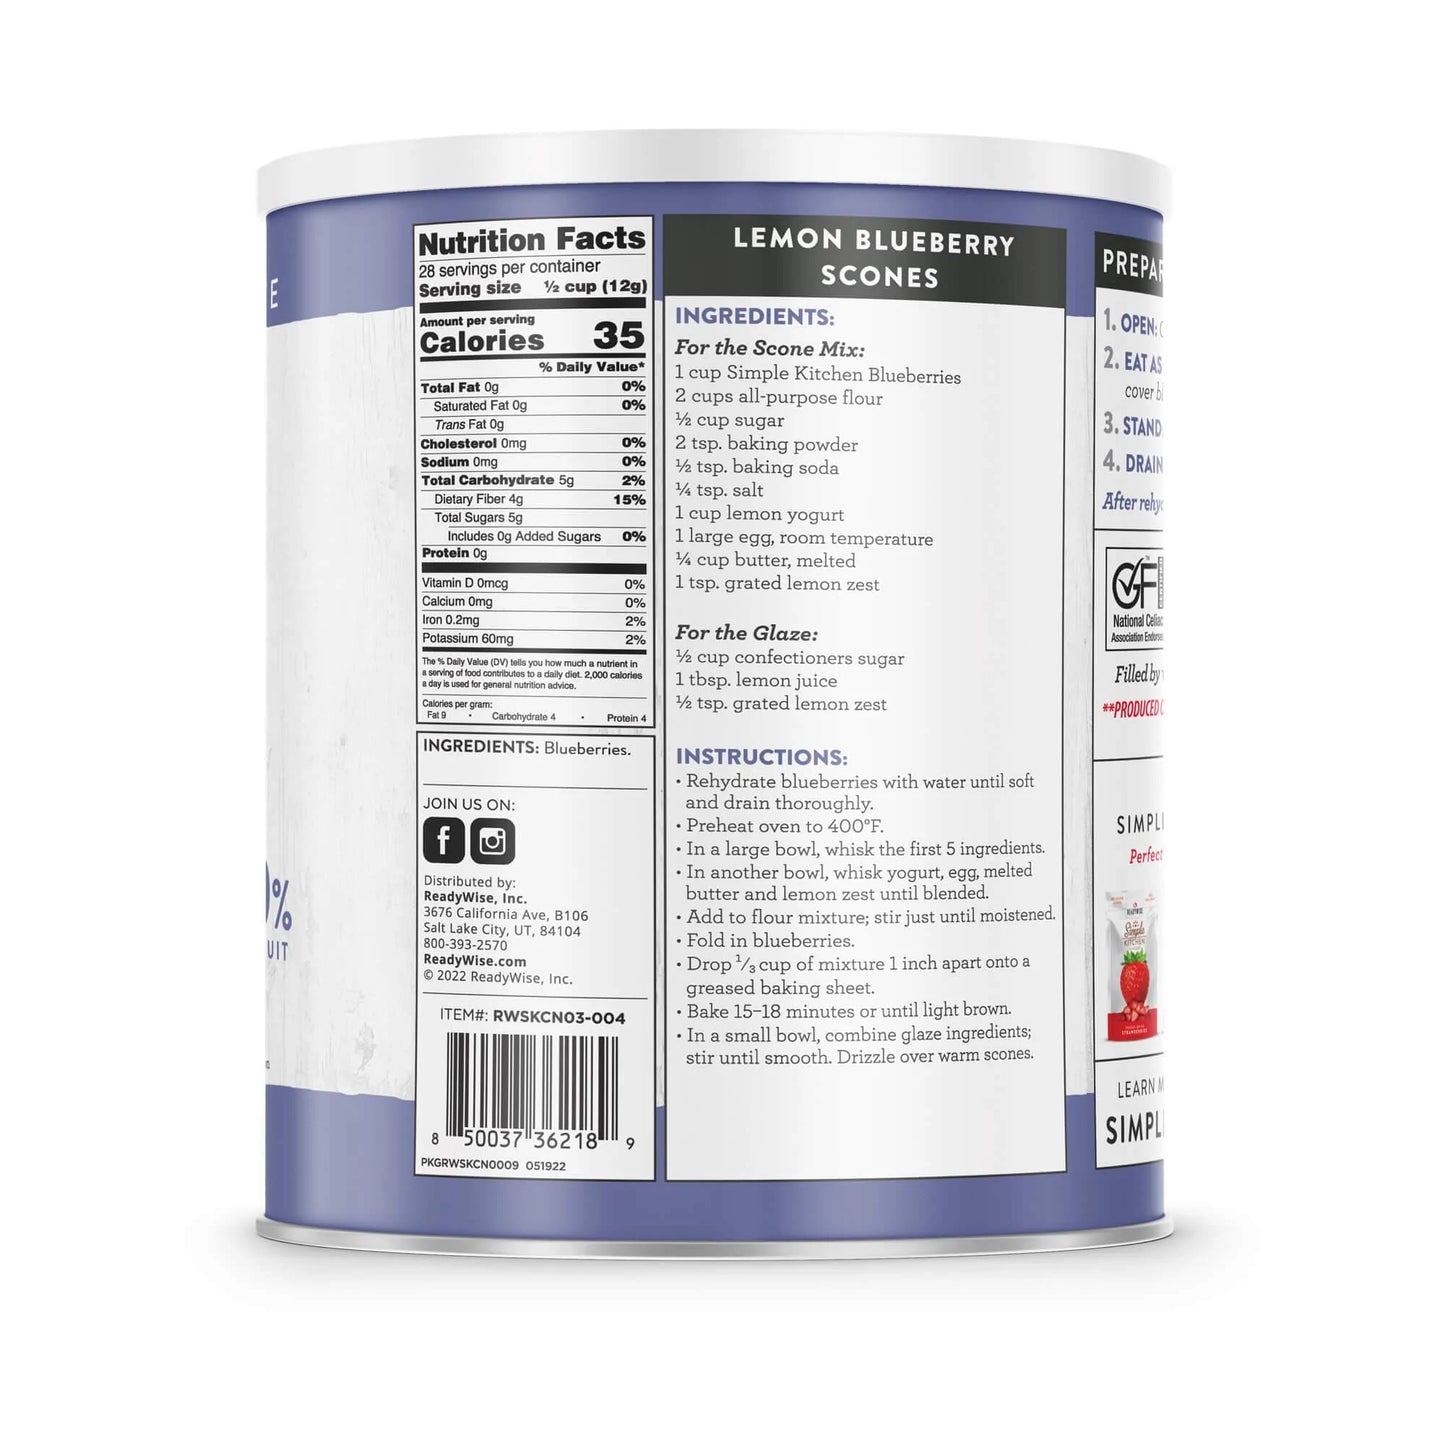 Freeze-Dried Whole Blueberries - 28 Serving #10 Can